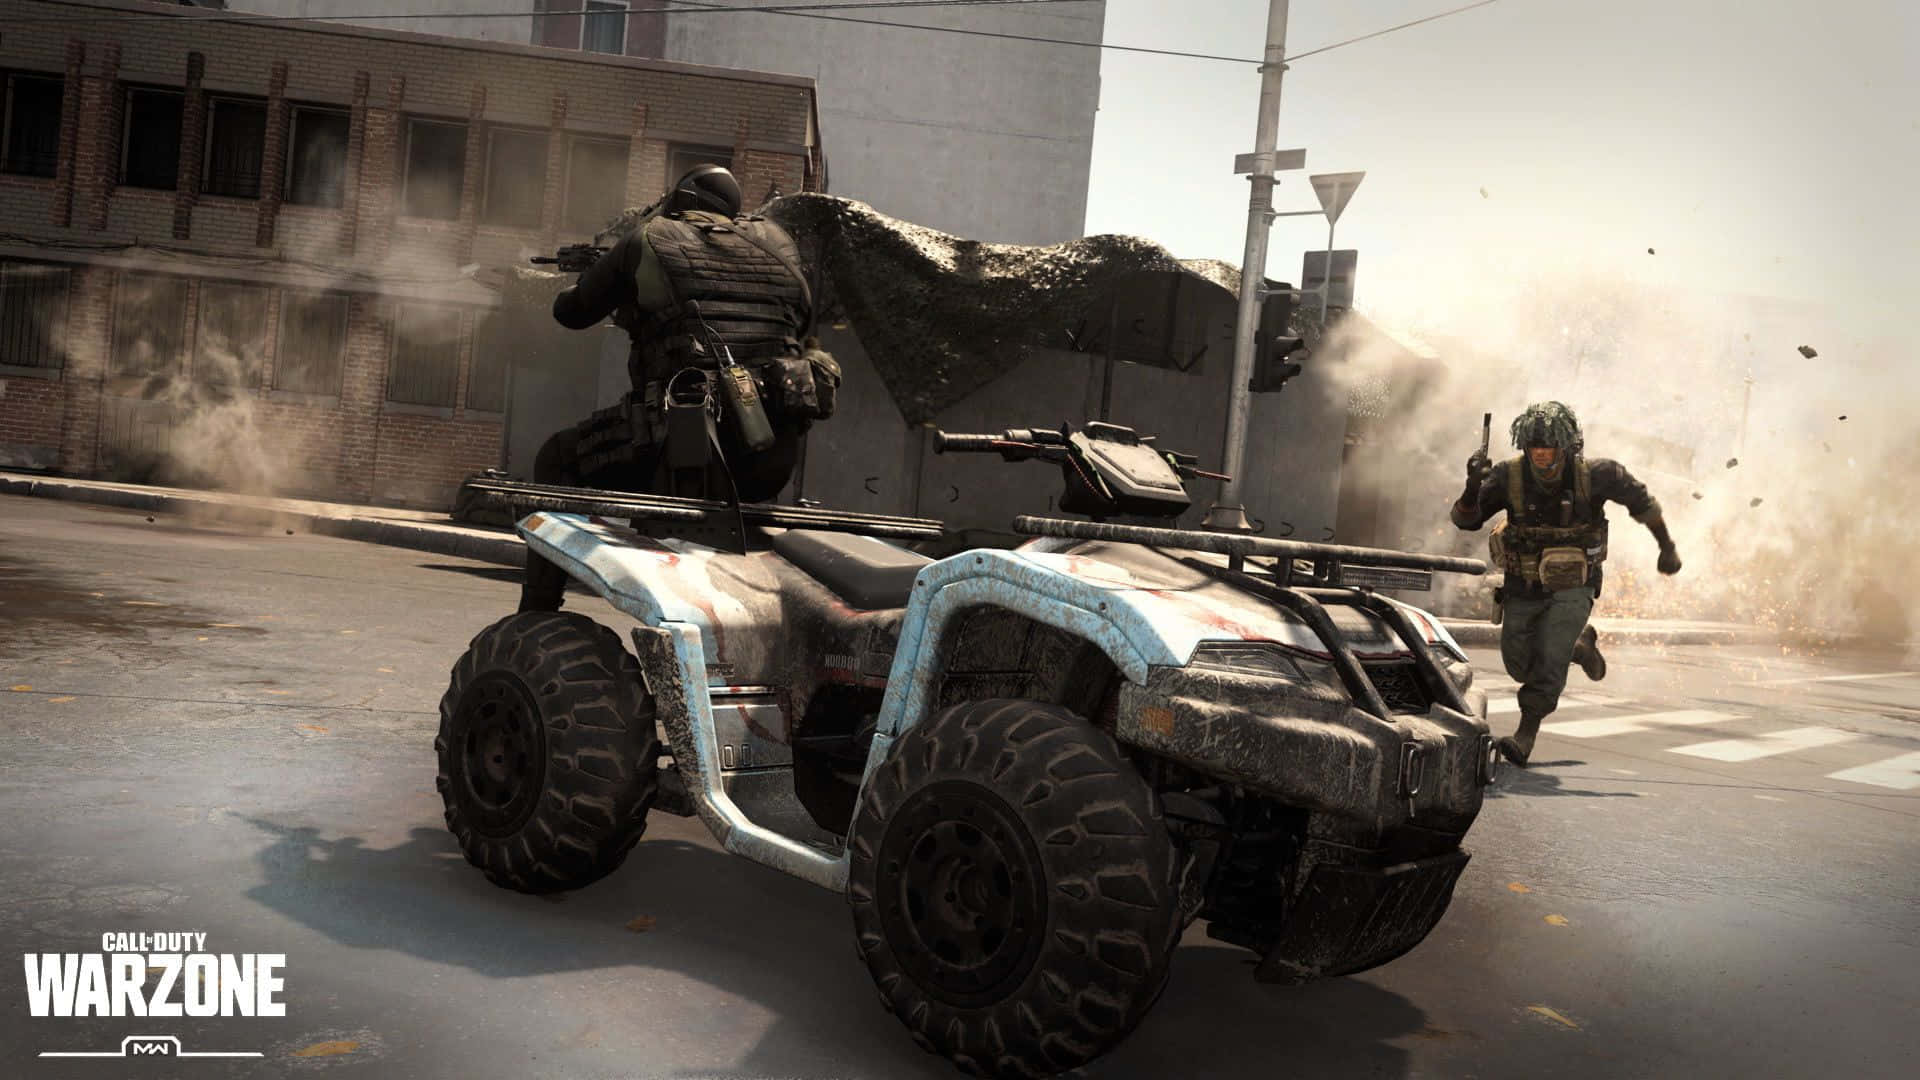 Intense Battle in Call of Duty with Armored Vehicles on the Frontline Wallpaper